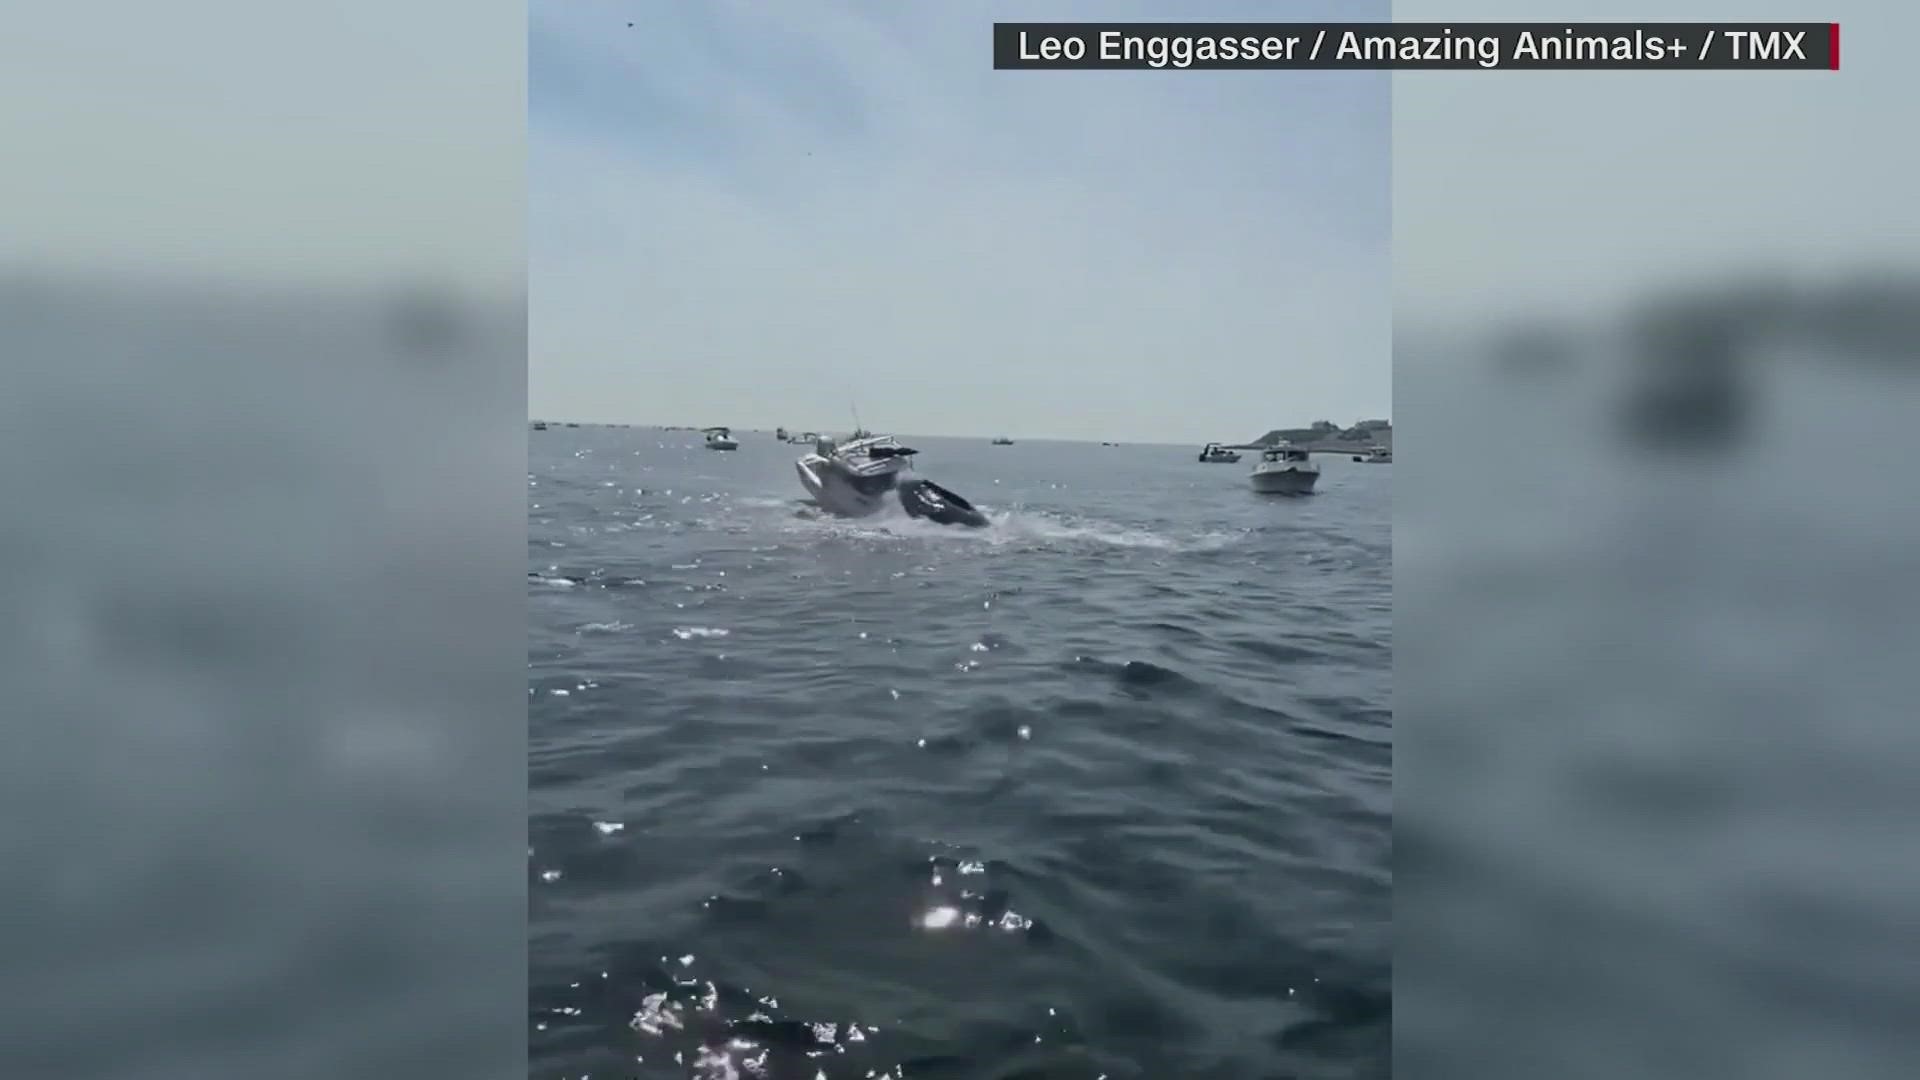 The harbormaster said no injuries were reported in the incident off the coast of Plymouth, Massachusetts.